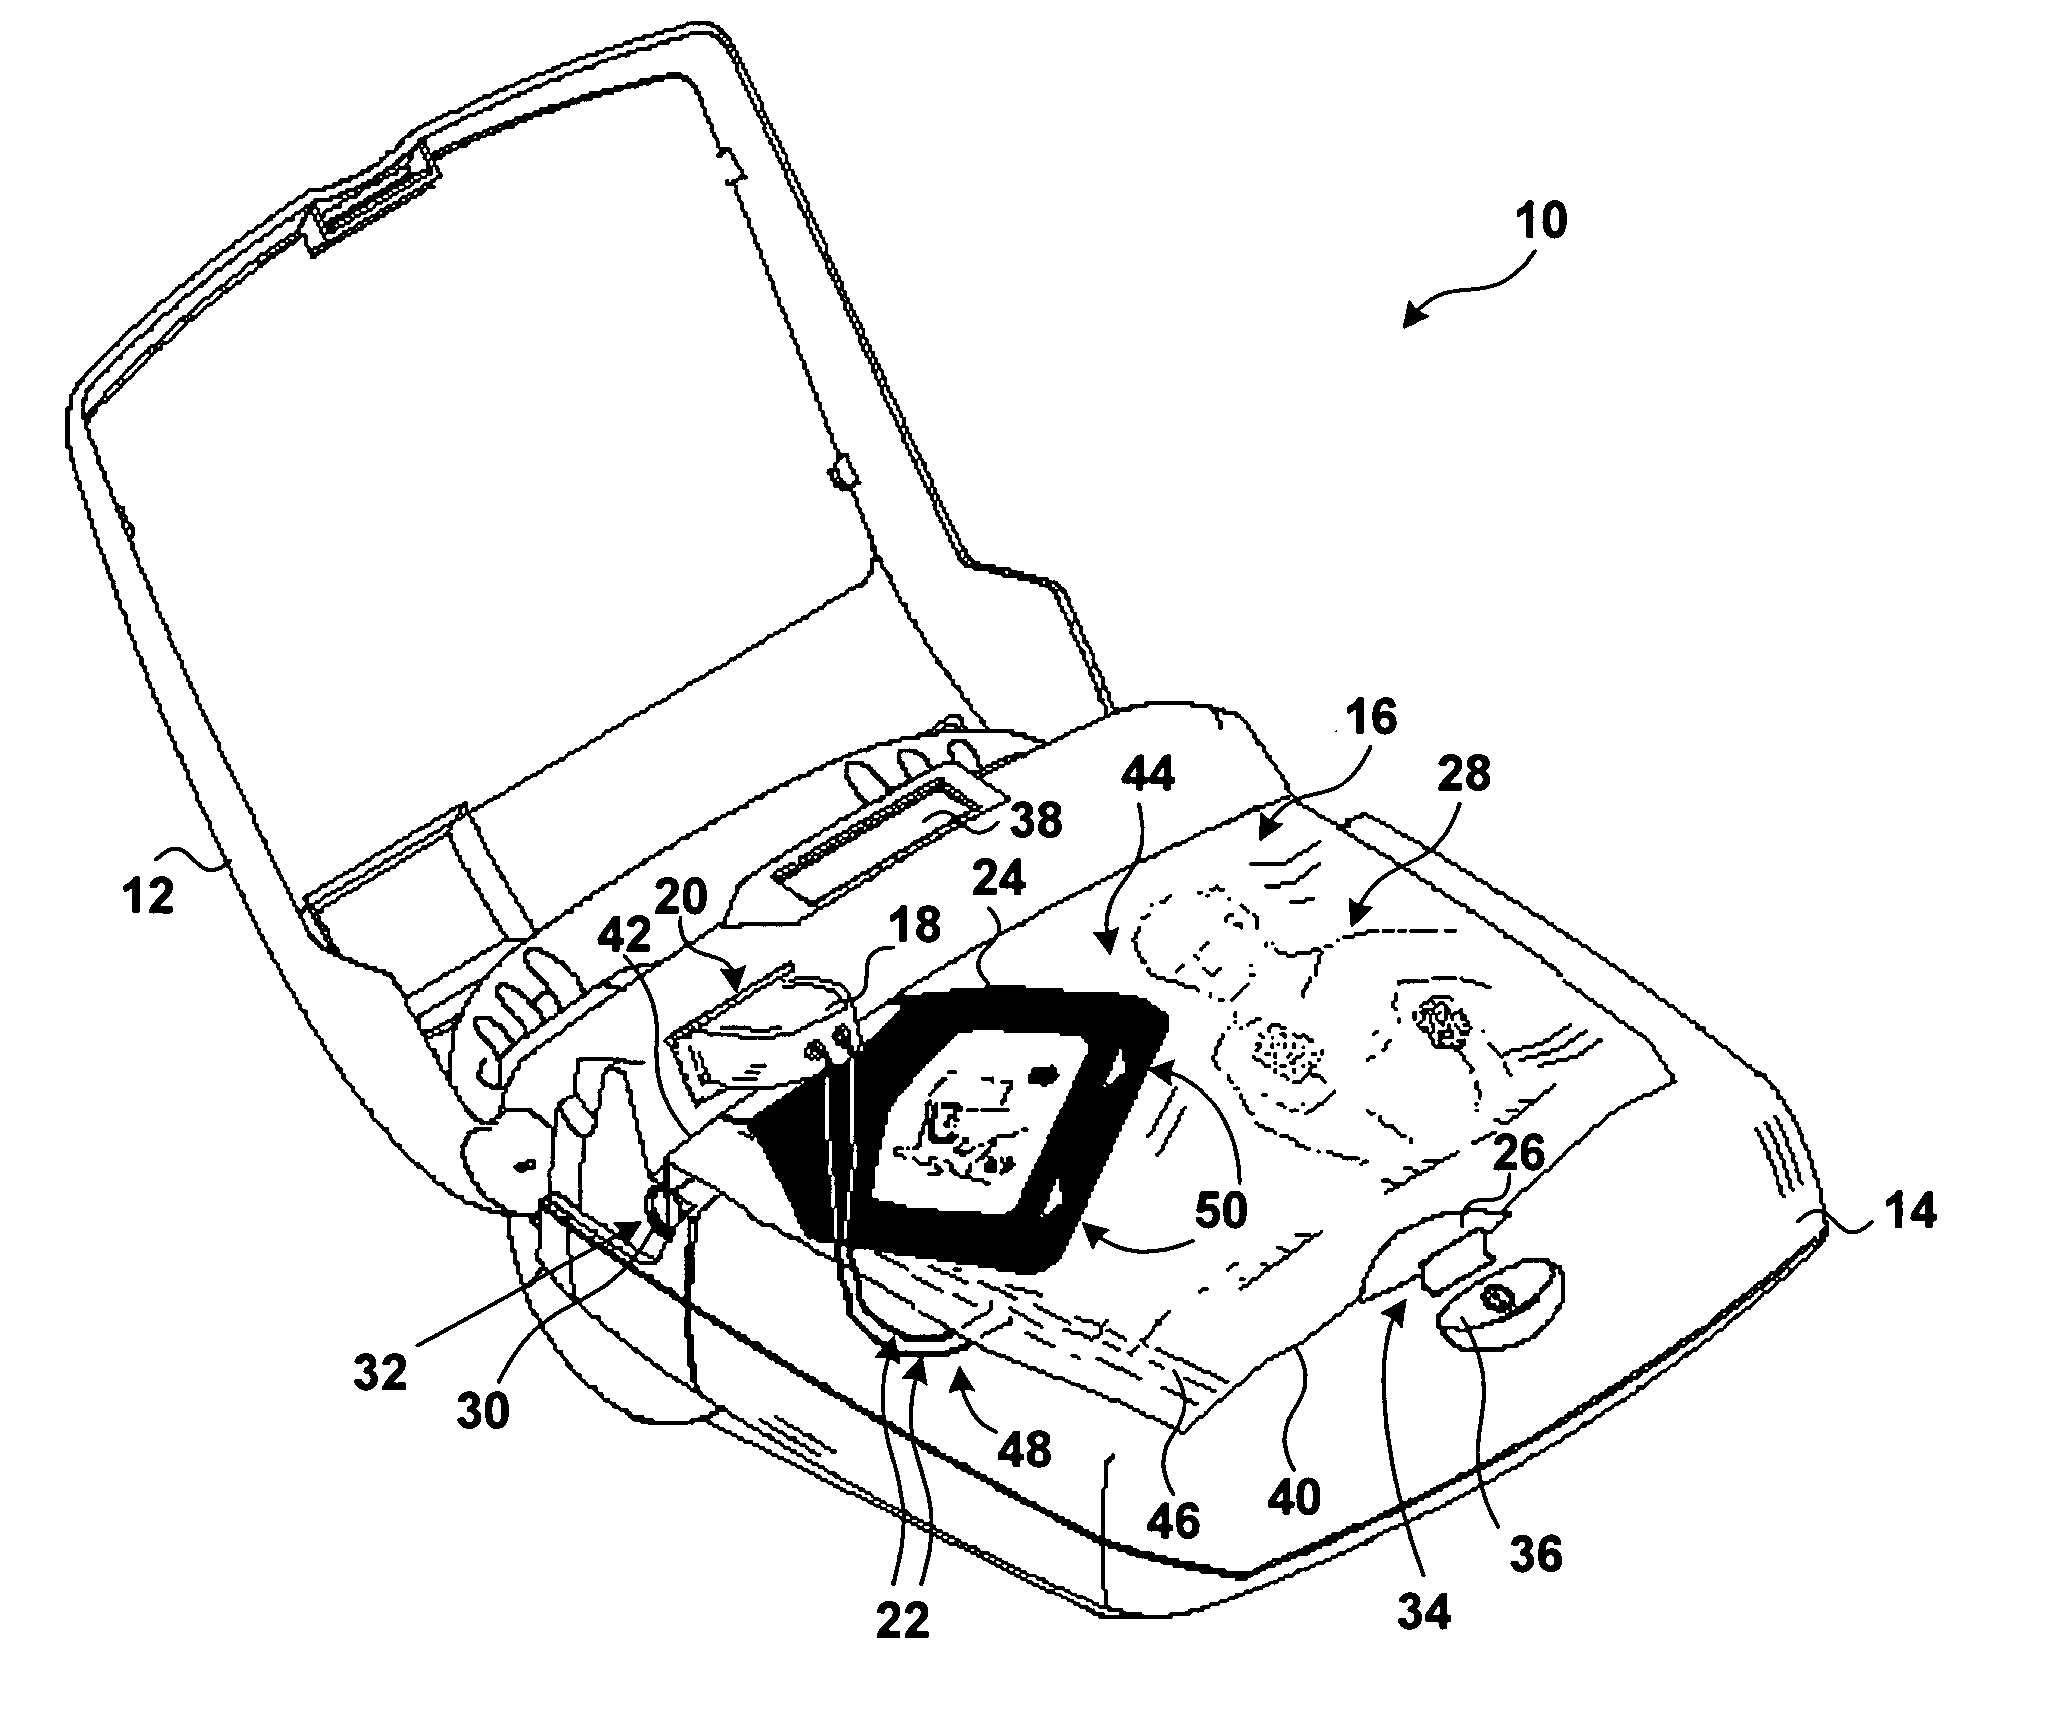 Easy-to-use electrode and package